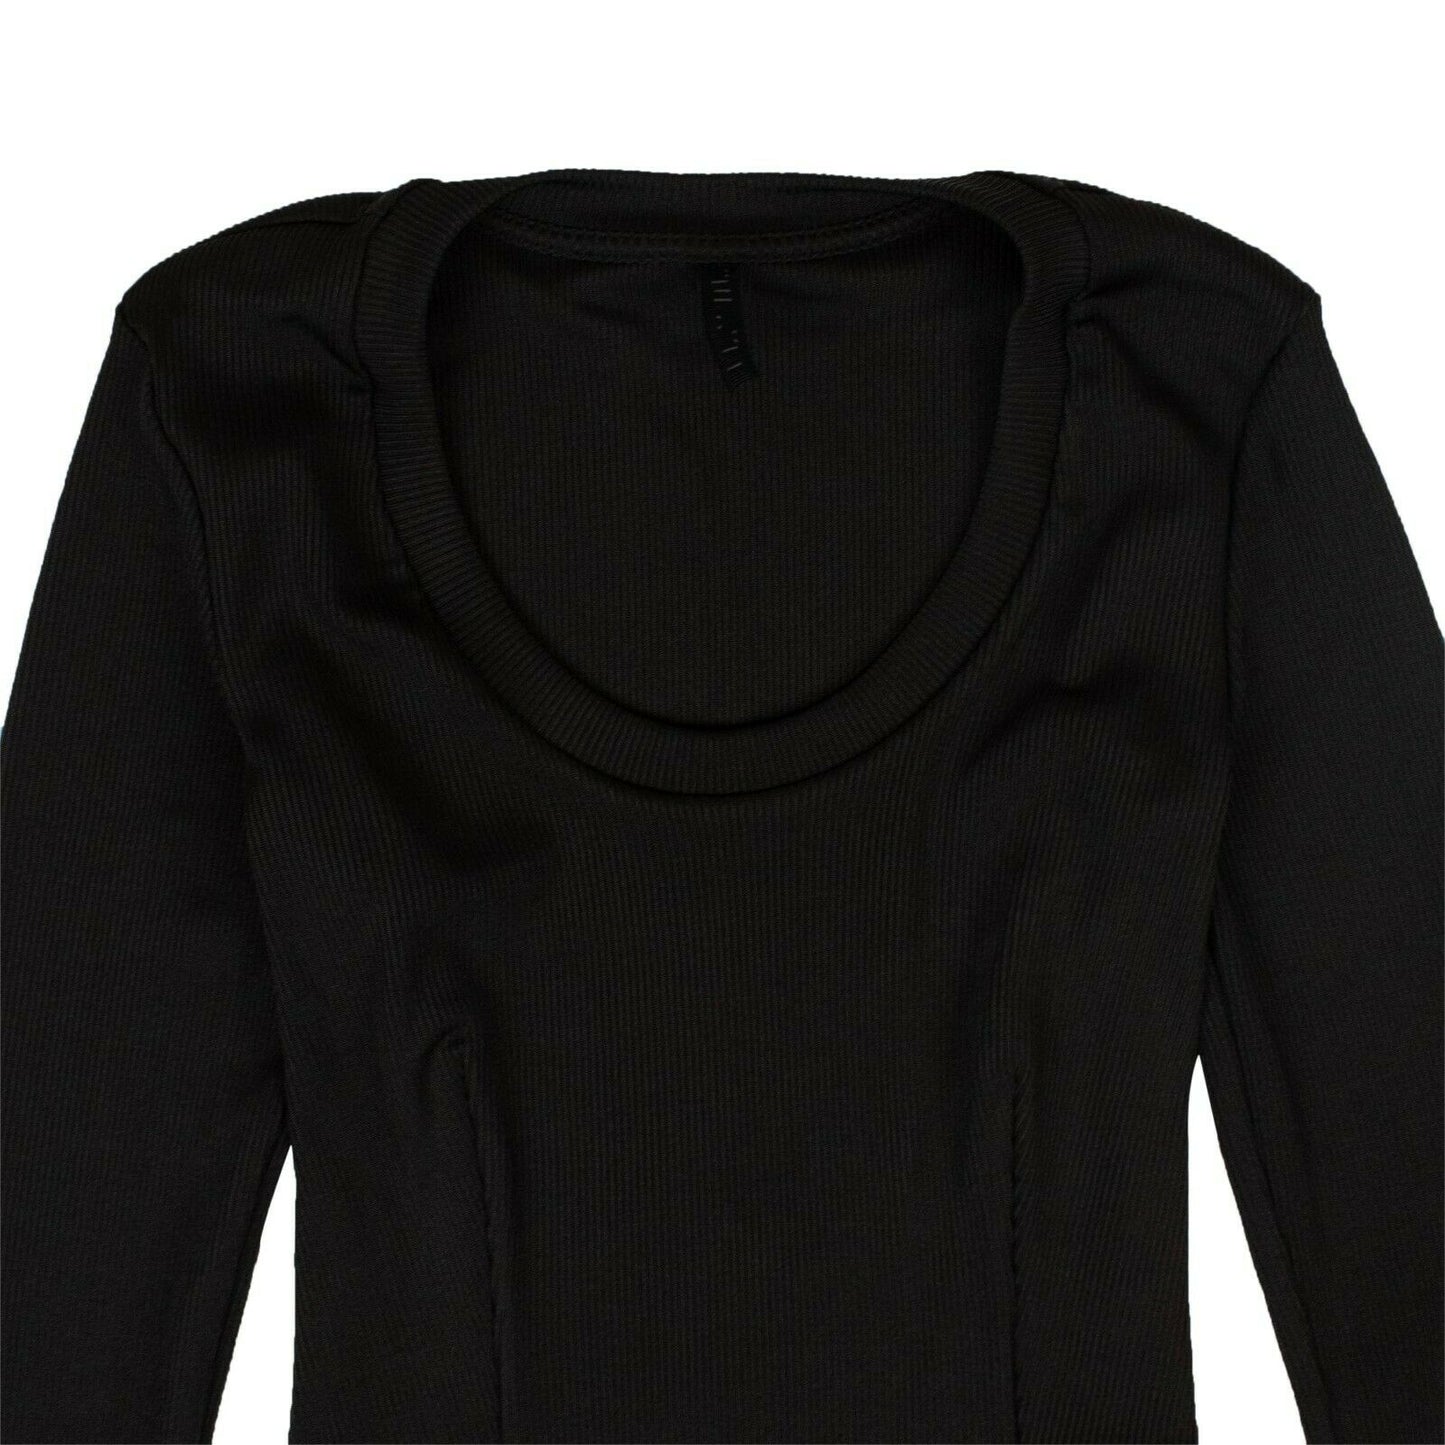 Unravel Project Knitted Long Sleeve Leotard - Black